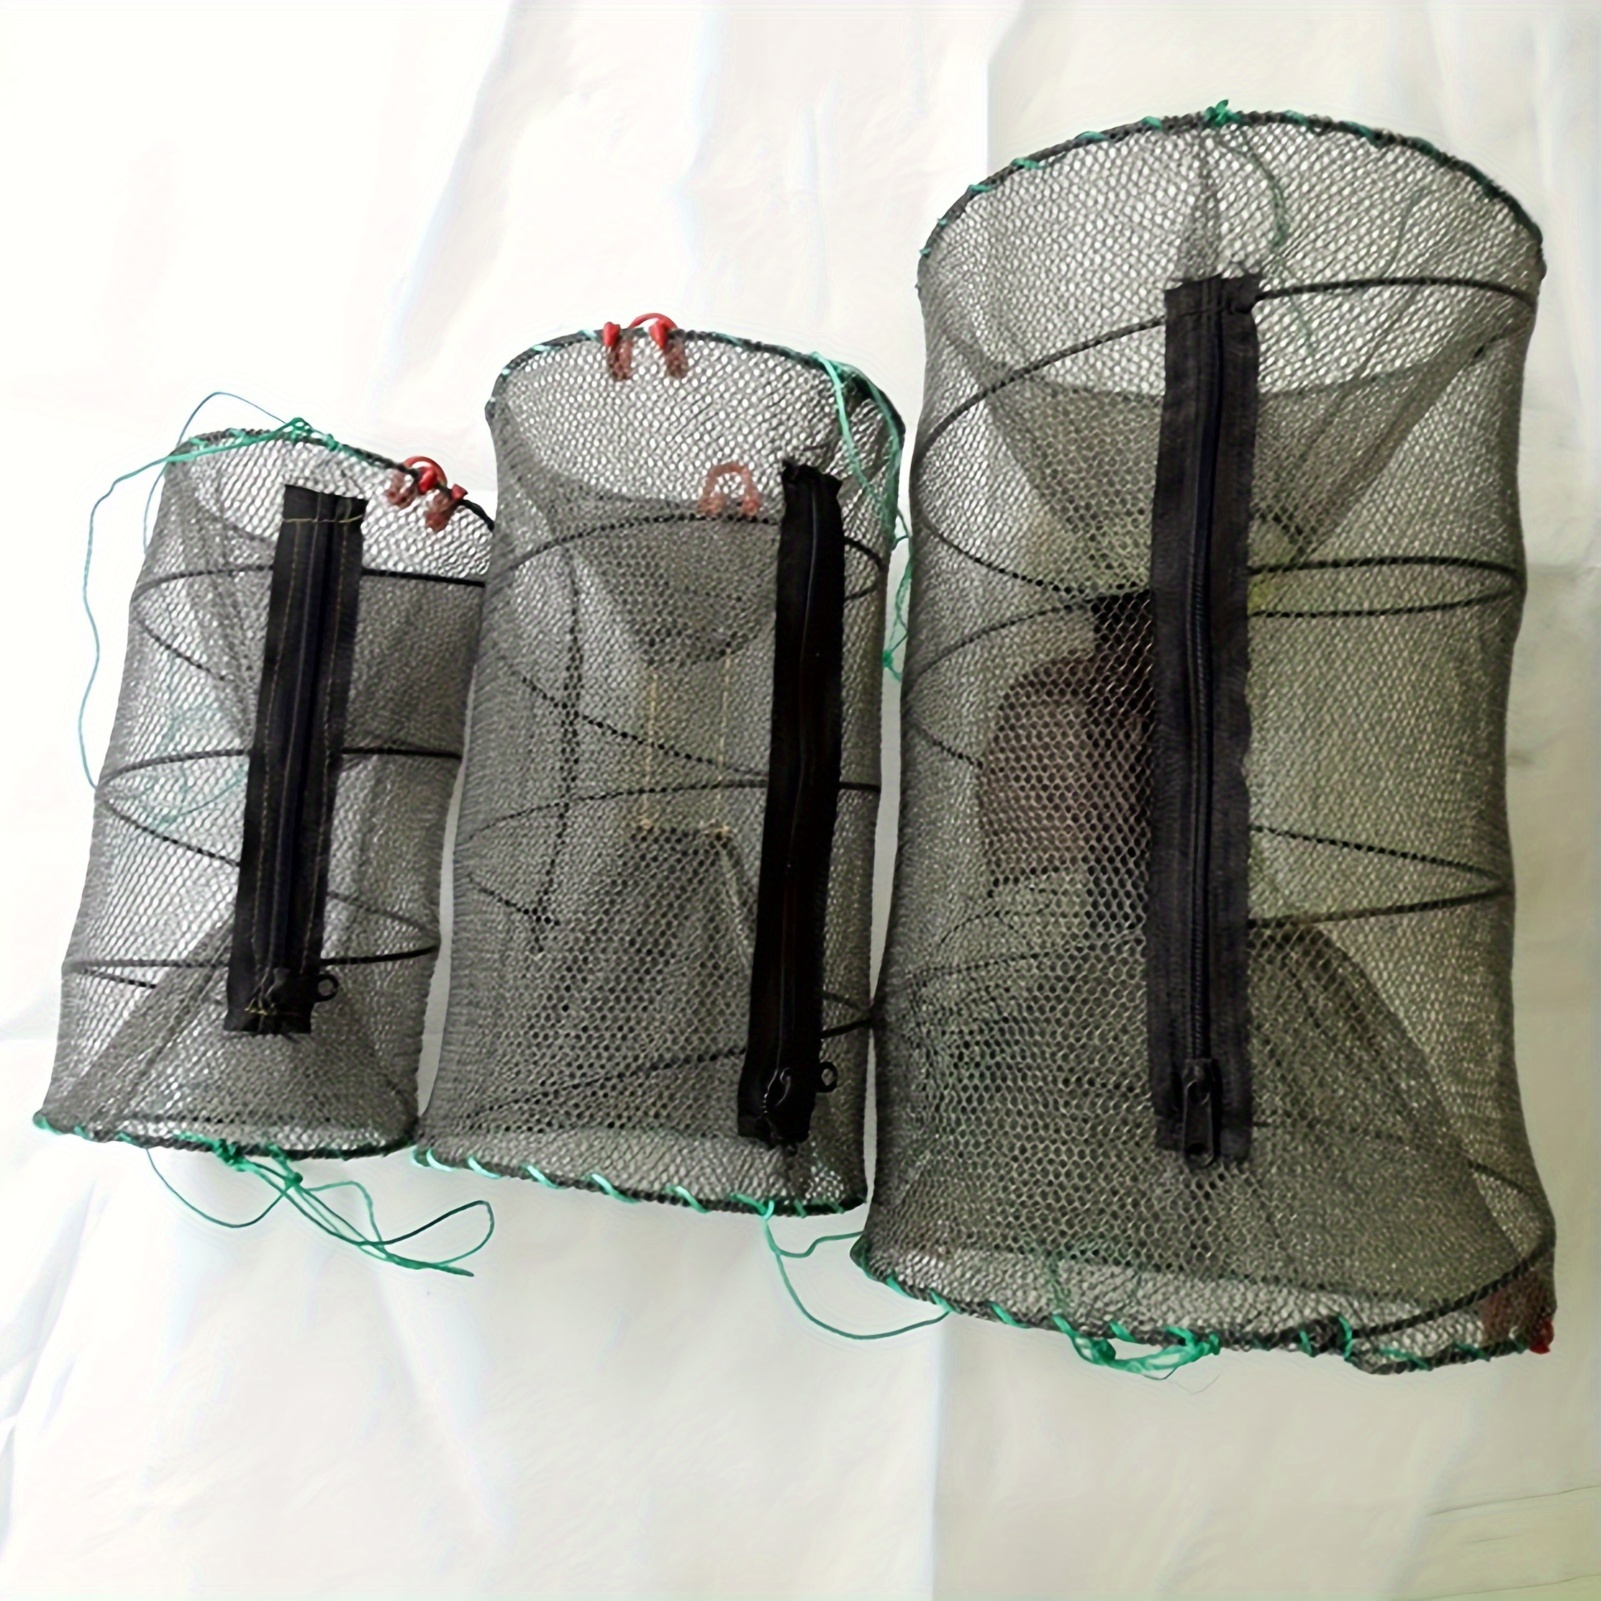 

Fishing Net Mesh Fish Cage Foldable Reusable Fishing Net Universal For All Types Of Fish Rust-proof Floating Basket Net Lobster Shrimp Crayfish Trap Accessories Buckle Color Random